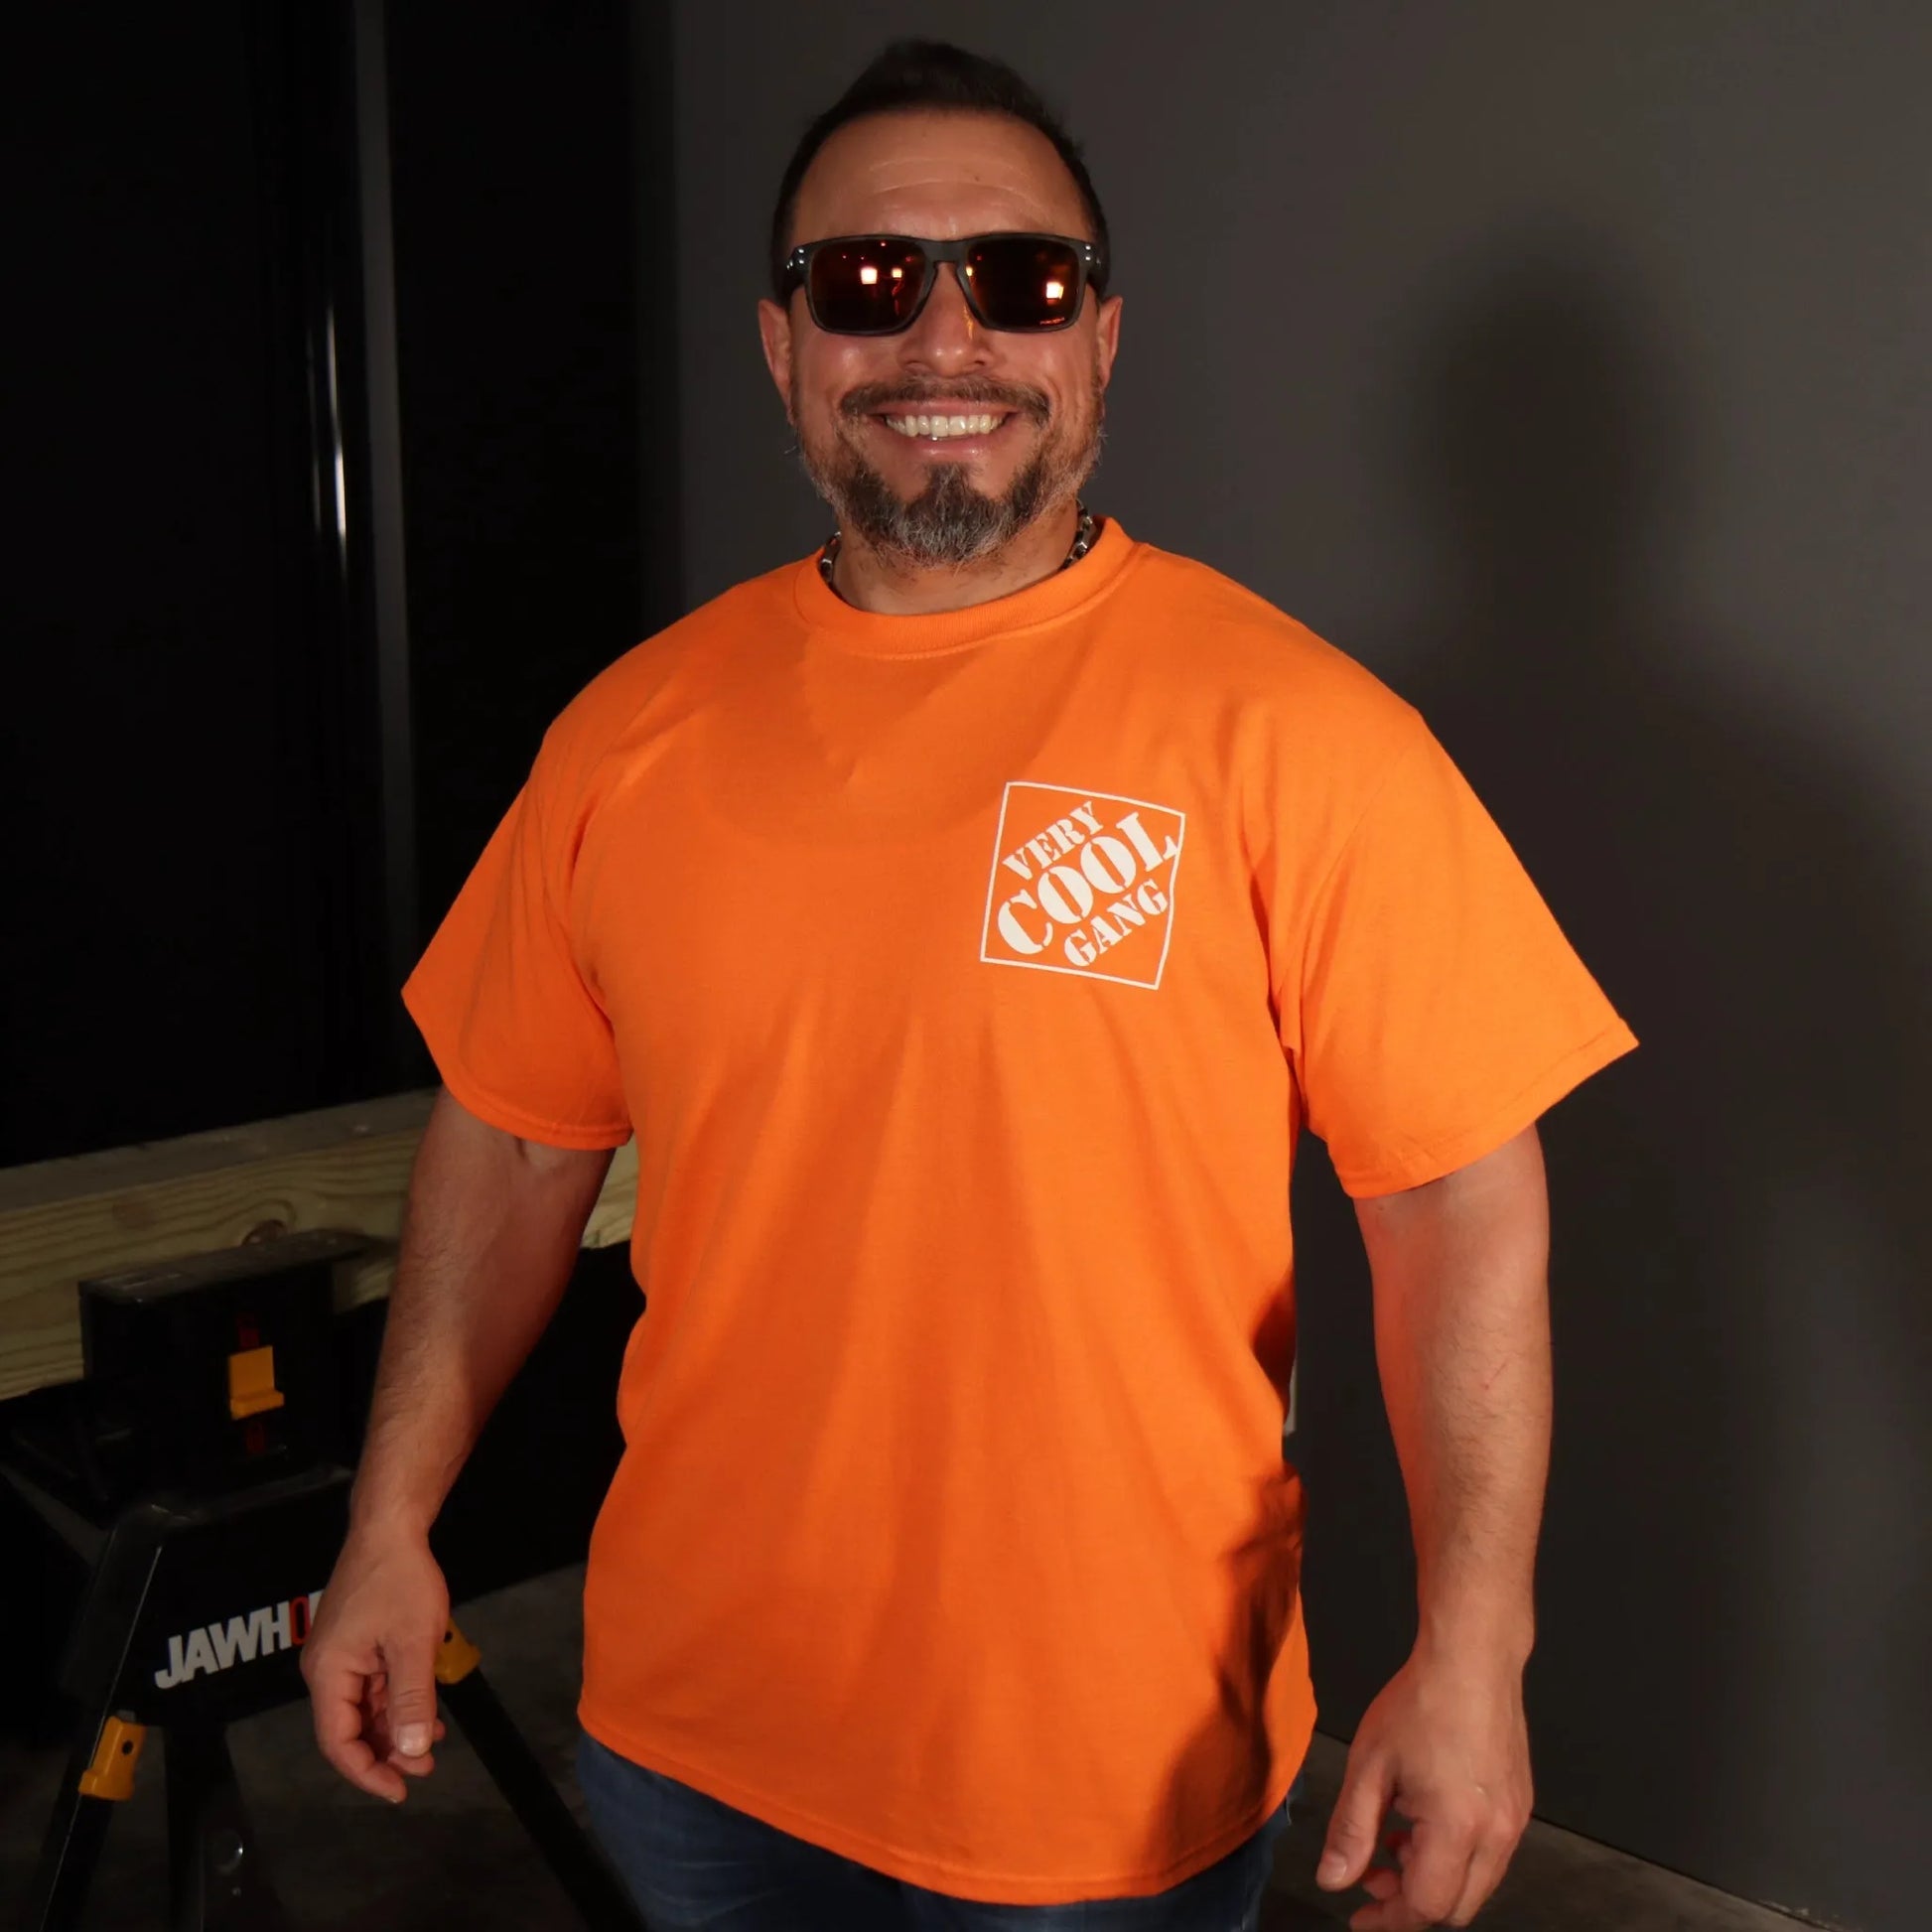 Dress to be seen with our High Visibility Orange Very Cool Gang T-shirt, proudly brought to you by VCG Construction. This vibrant and eye-catching shirt not only offers a bold fashion statement but also ensures that everyone know you enjoy a good tool deal